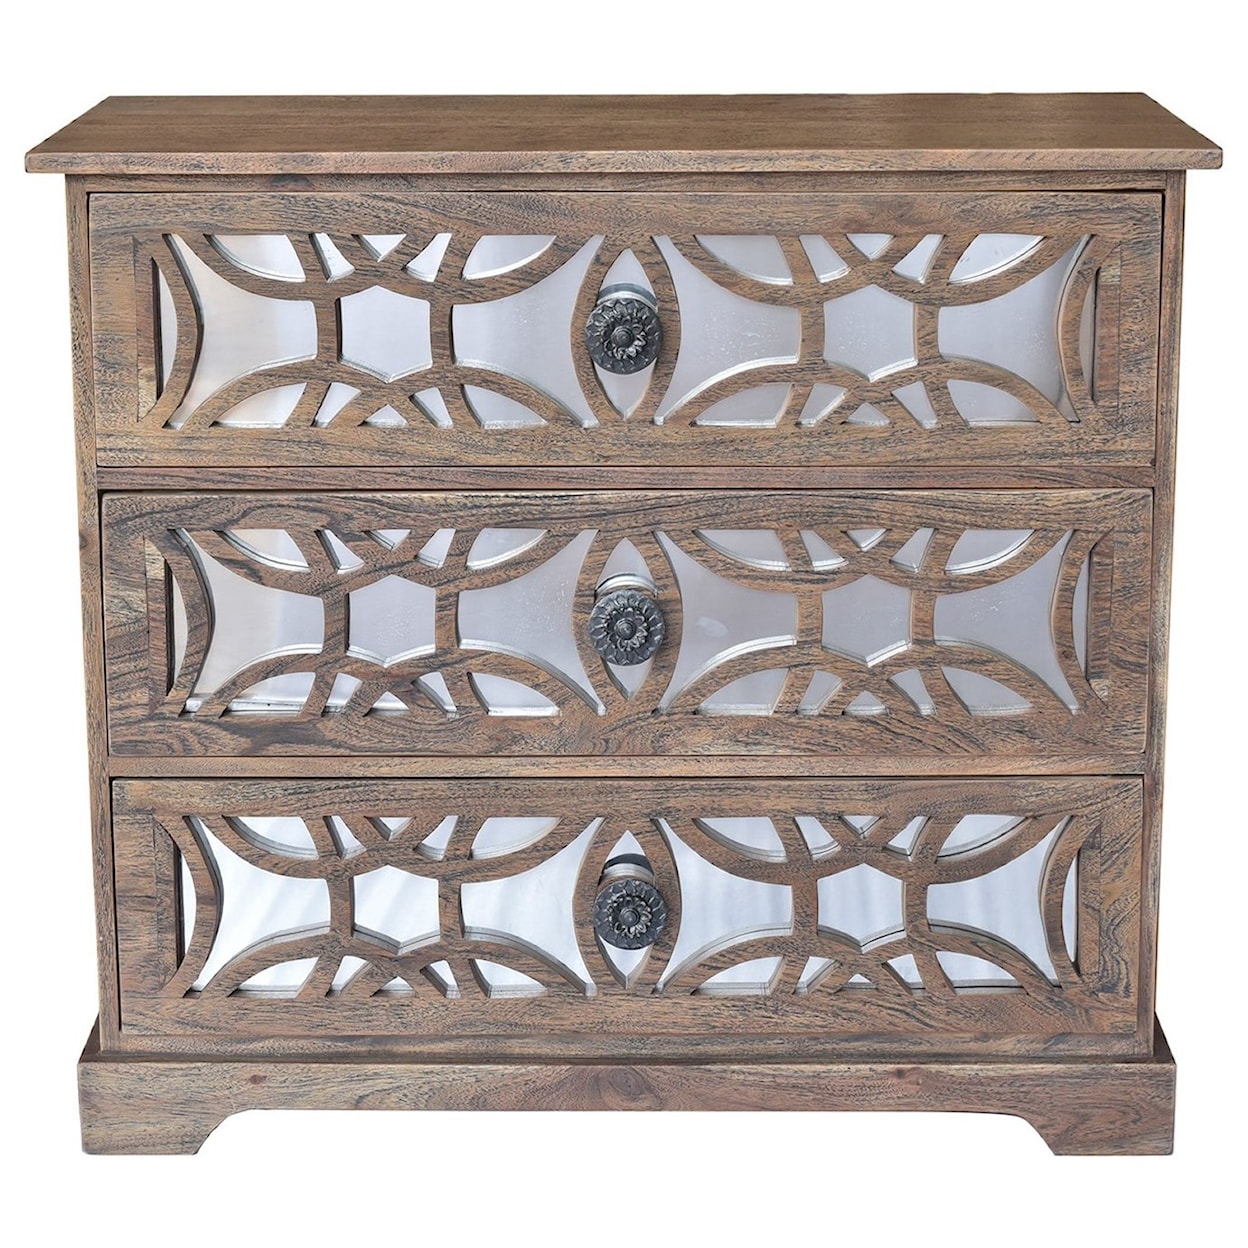 Crestview Collection Accent Furniture Bengal Manor Dark Mango Wood 3 Drawer Fretwo